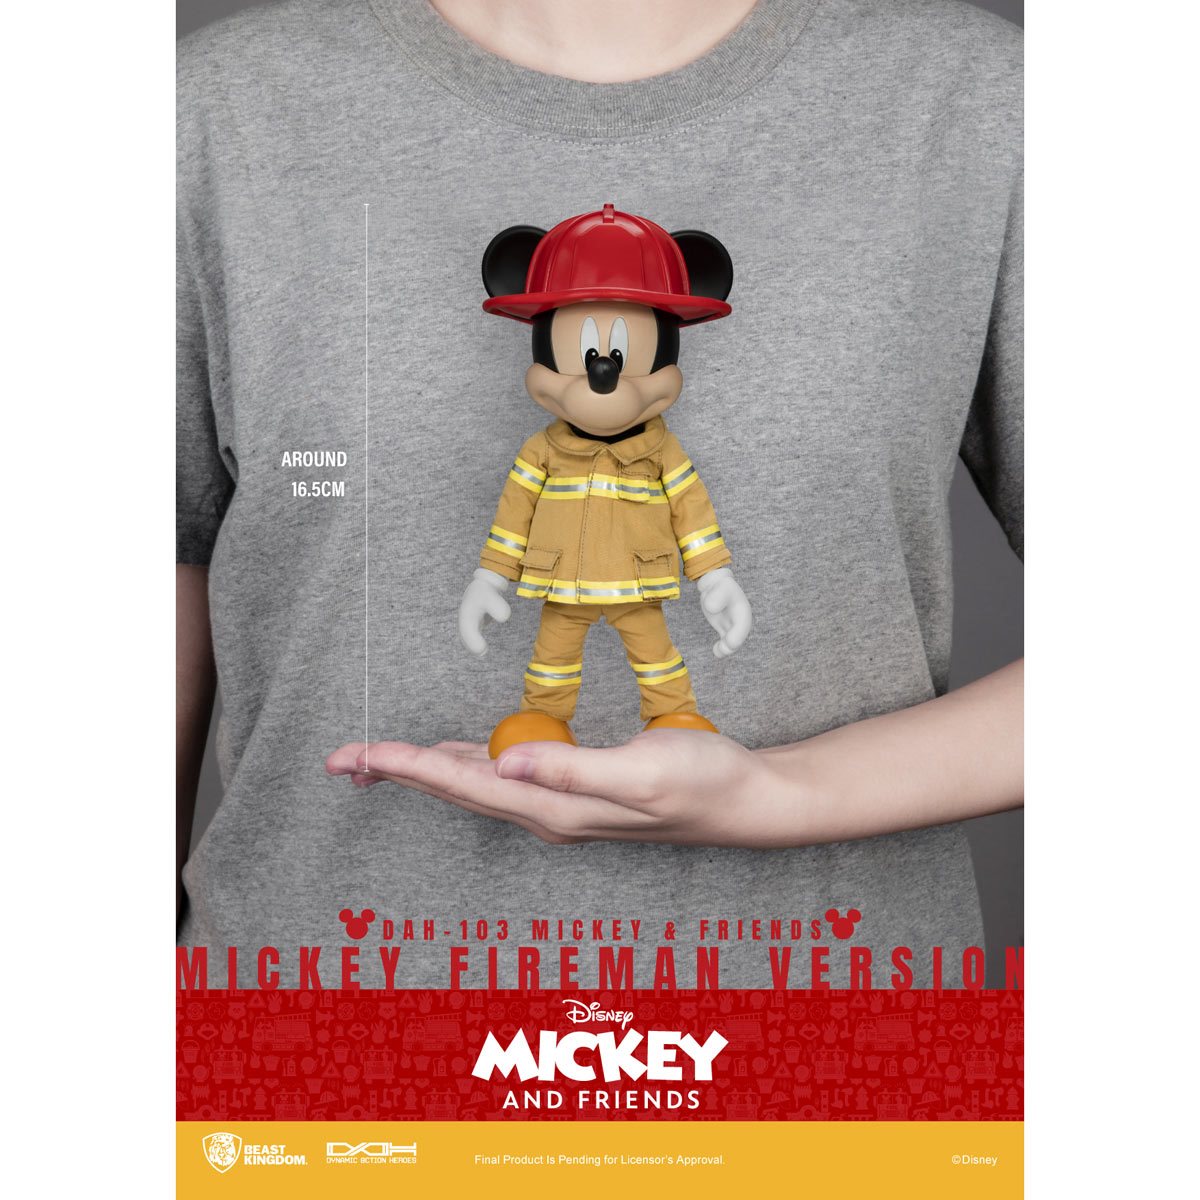 Figure Friends Action Mouse Heroes Mickey 8-Ction and Mickey Fireman Dynamic DAH-103